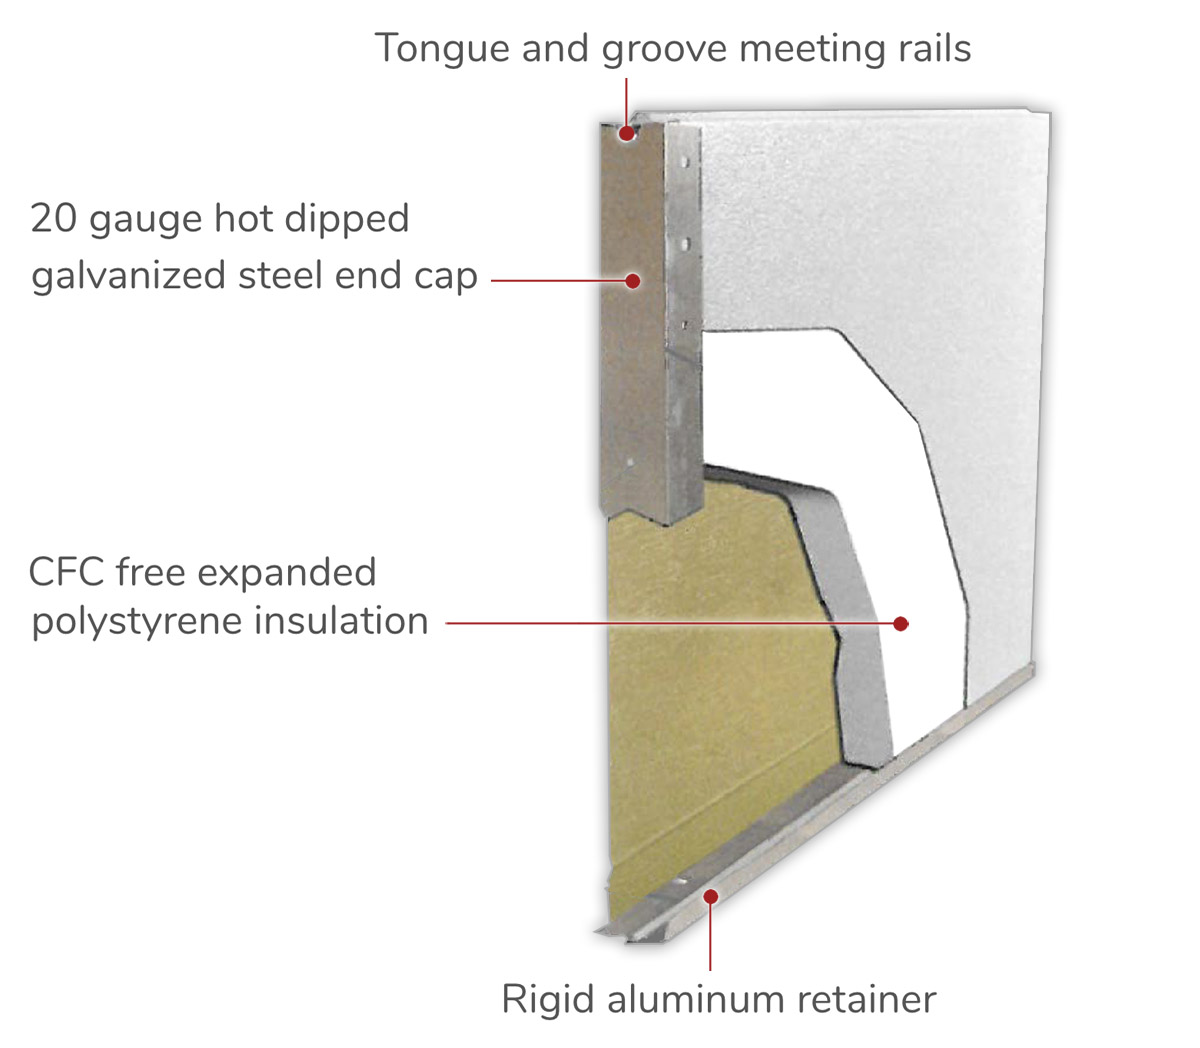 Homestead residential garage door cross section diagram - Tongue and groove meeting rails, CFC expanded polystyrene insulation, 20 guage hot dipped galvanized steel end cap, rigid aluminum container.